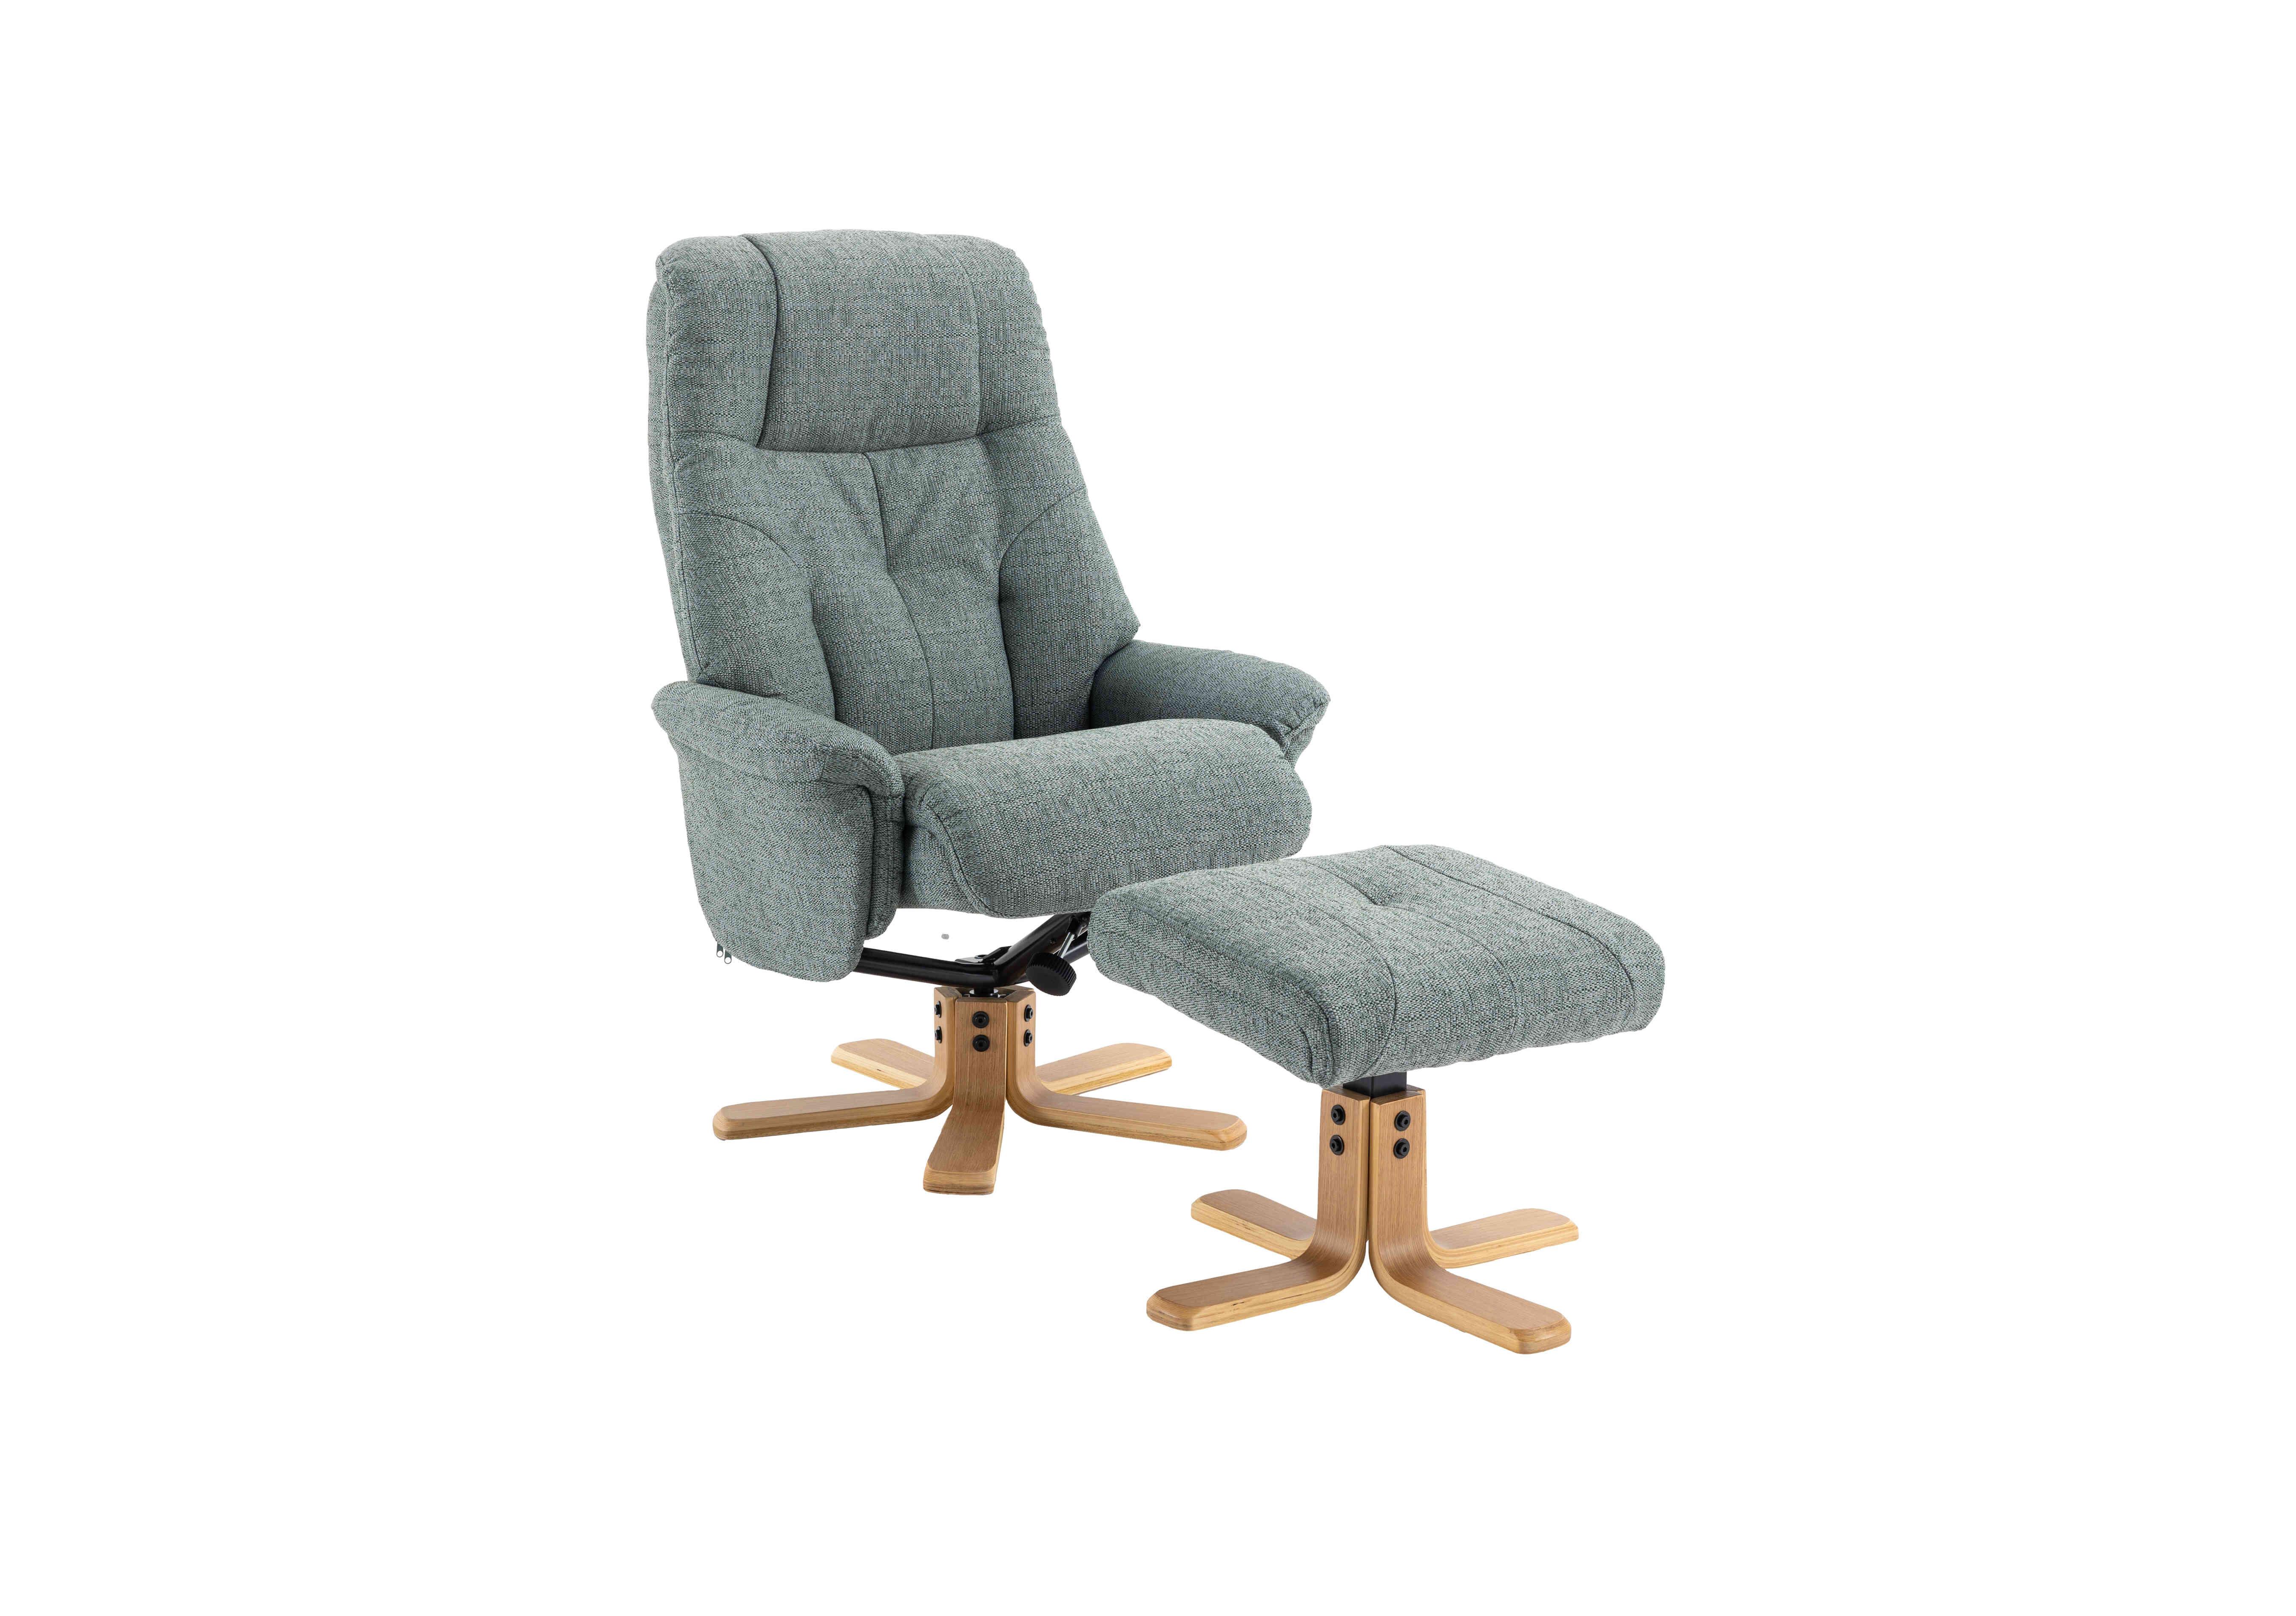 Muscat Fabric Swivel Recliner Chair with Footstool in Lisbon Teal on Furniture Village